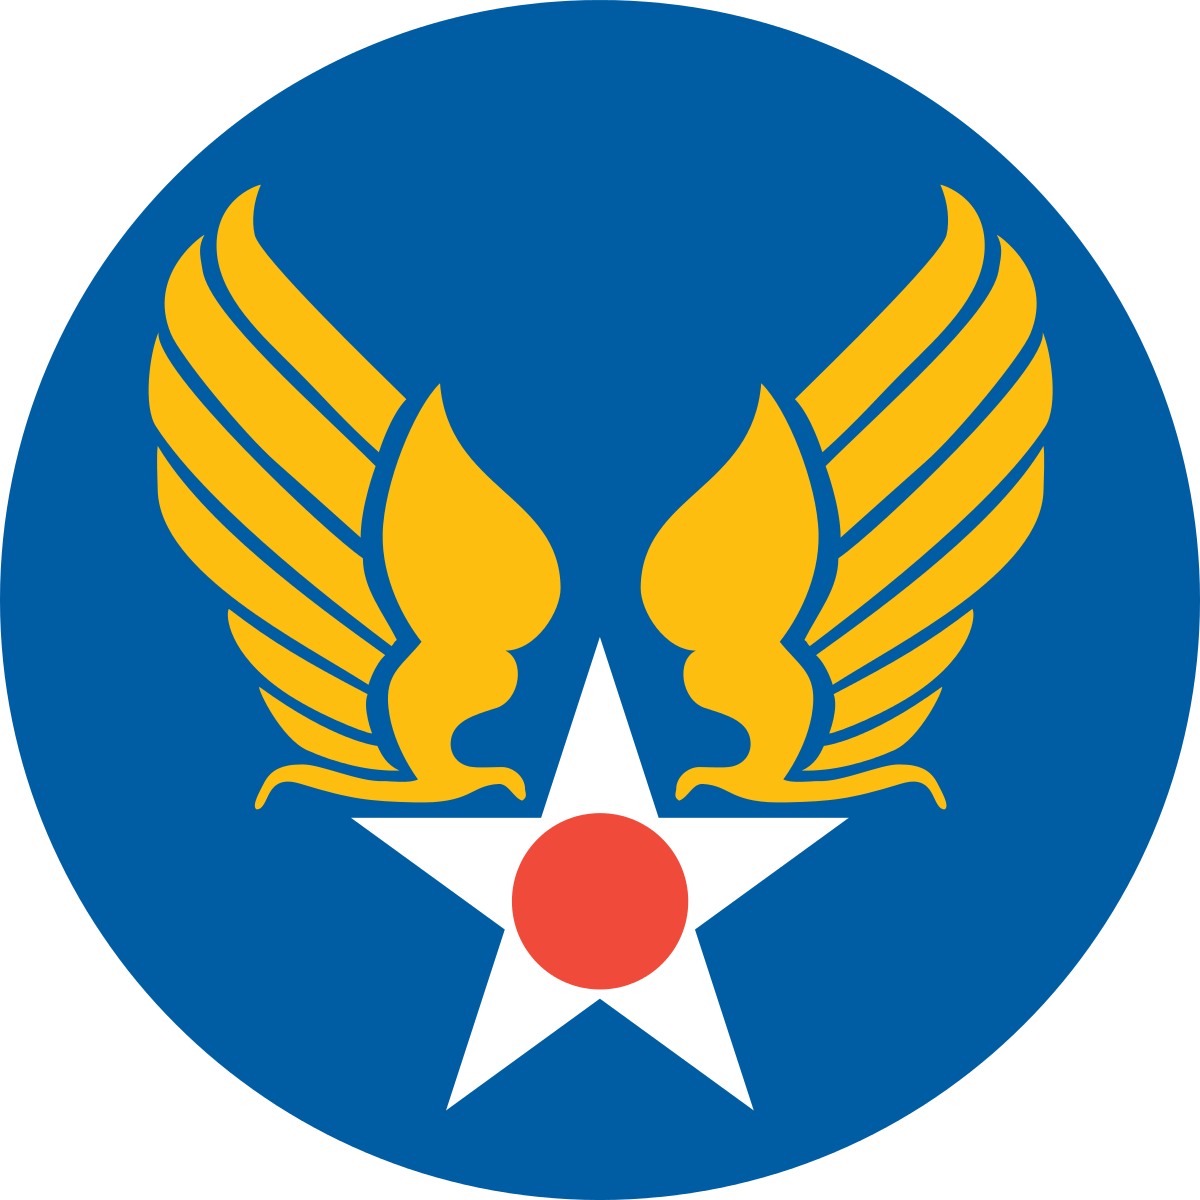 Top Three Us Air Force Logo - United States Army Air Forces